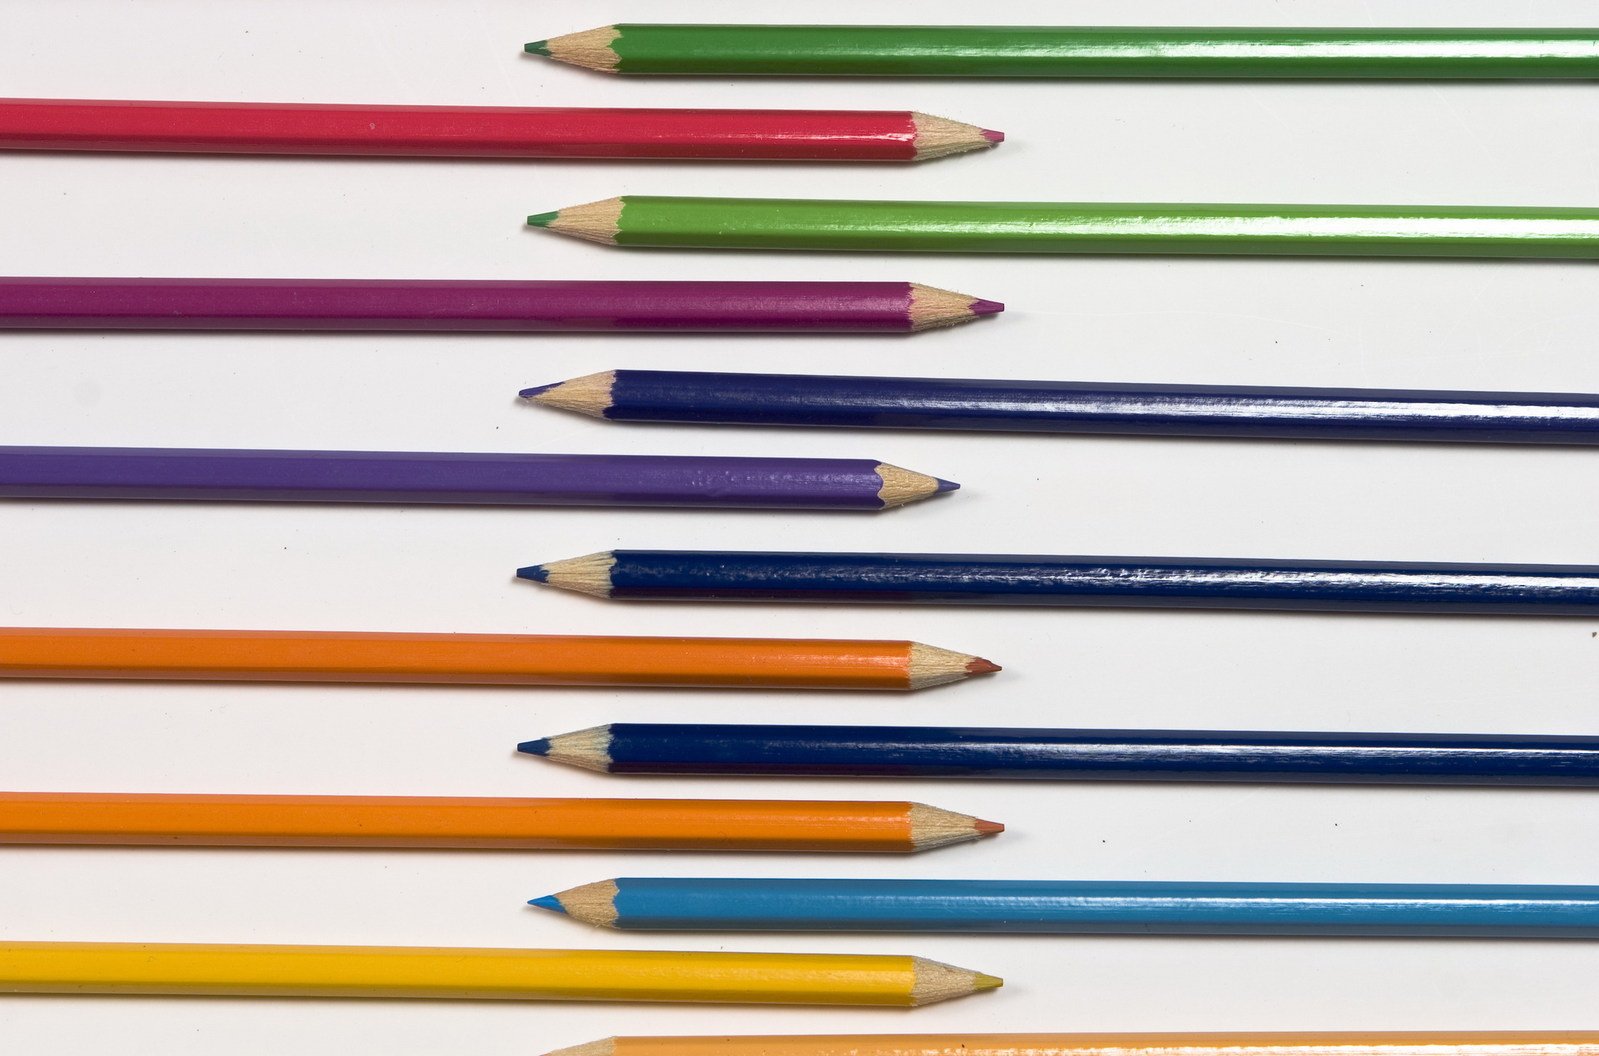 many pencils lined up together next to each other